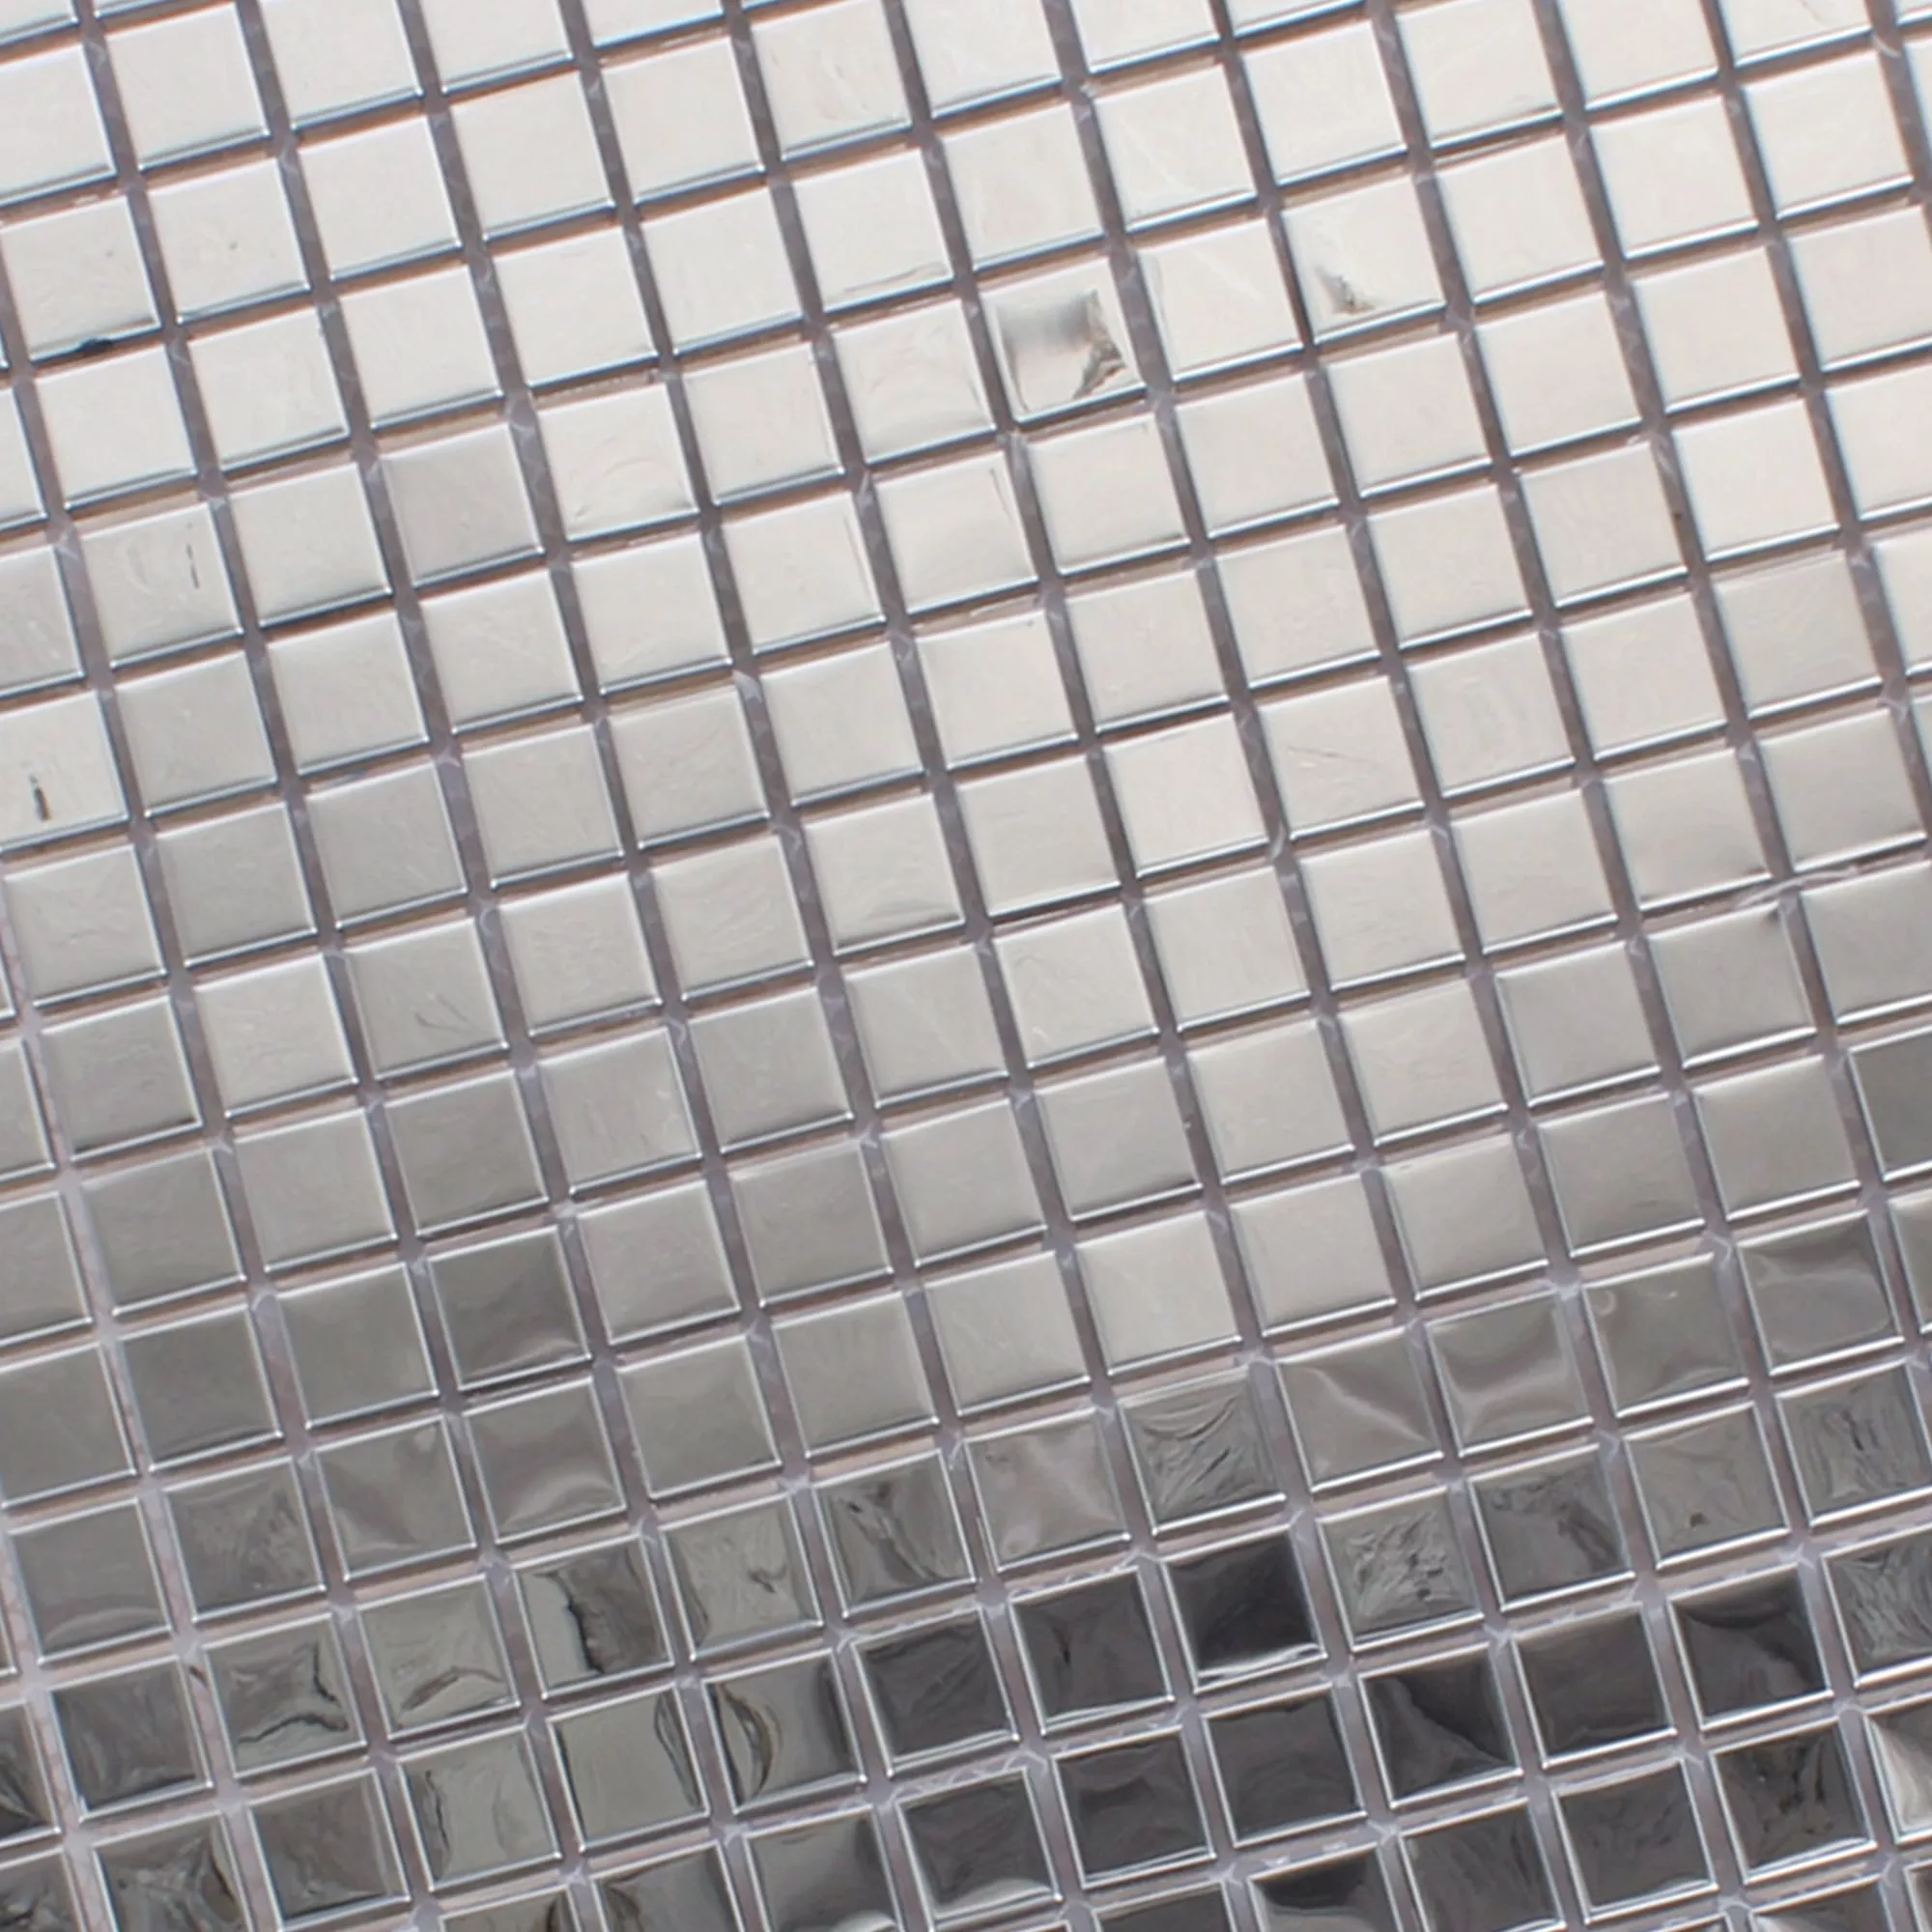 Sample Stainless Steel Mosaic Tiles Glossy Square 15